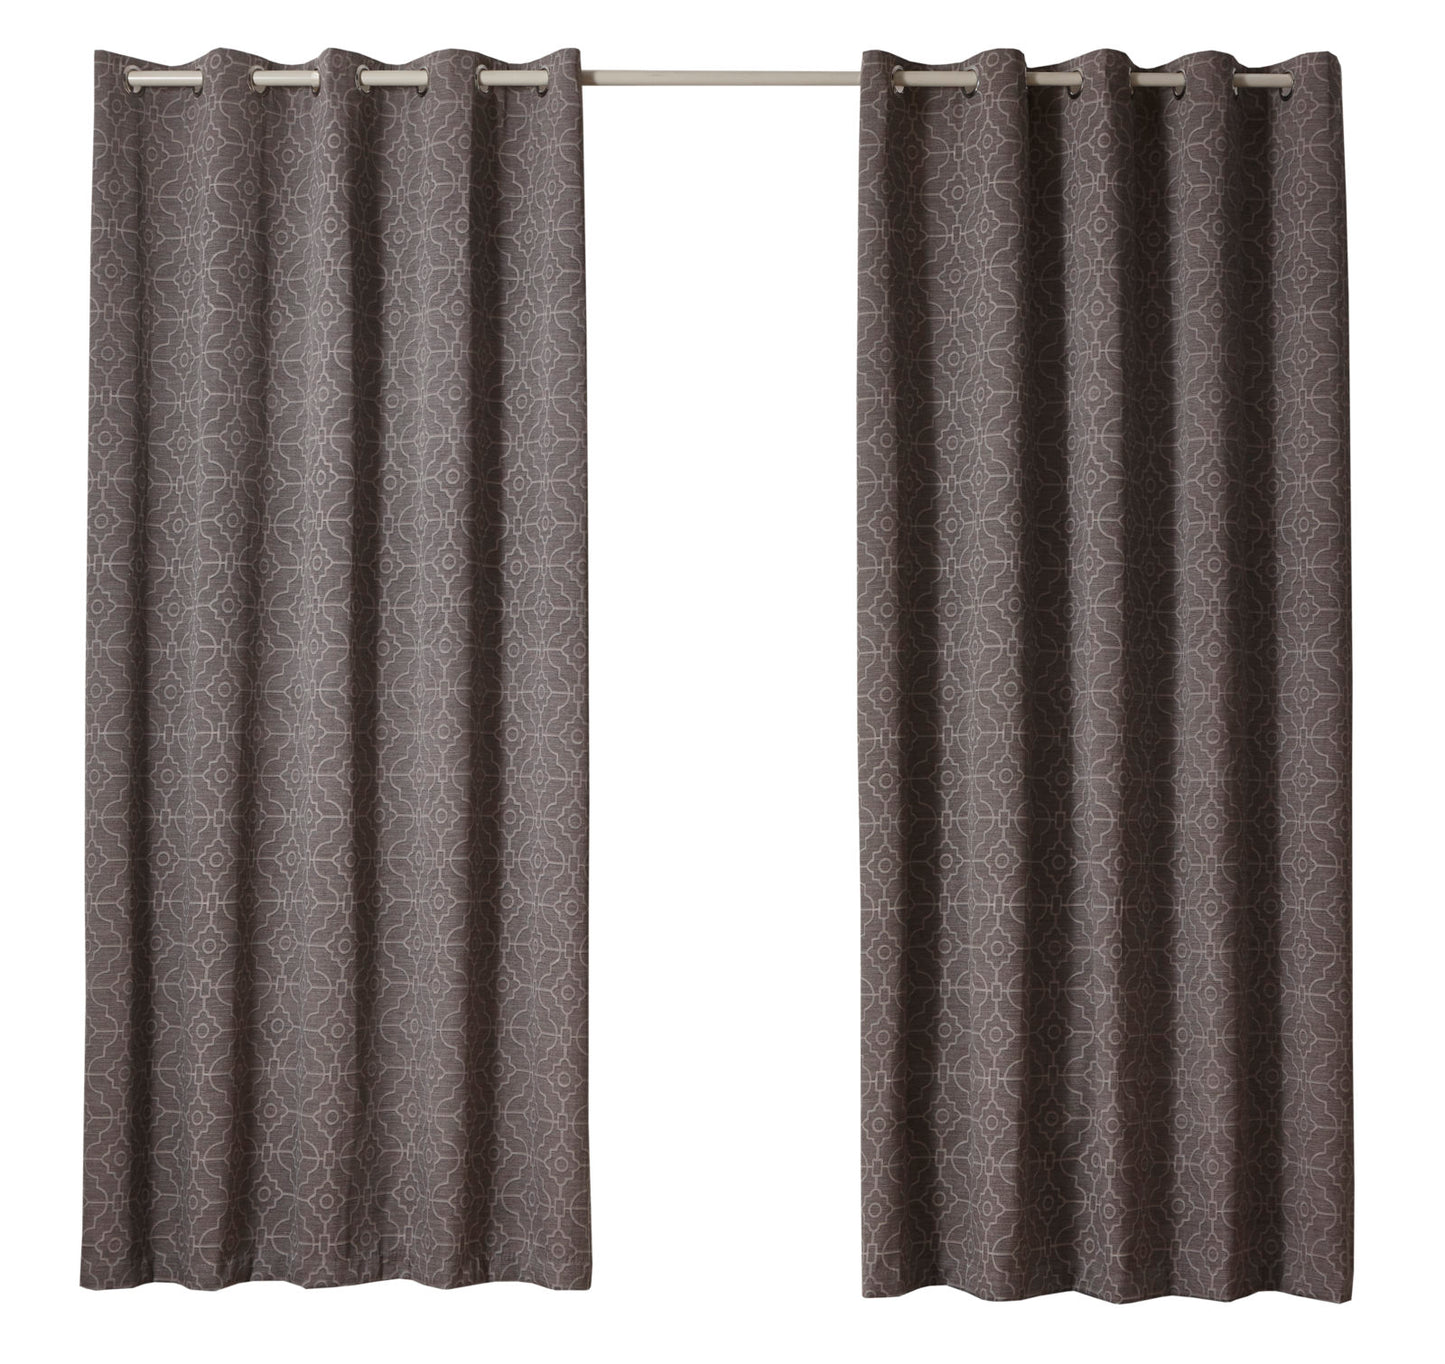 Franklin Eyelet Curtains Charcoal